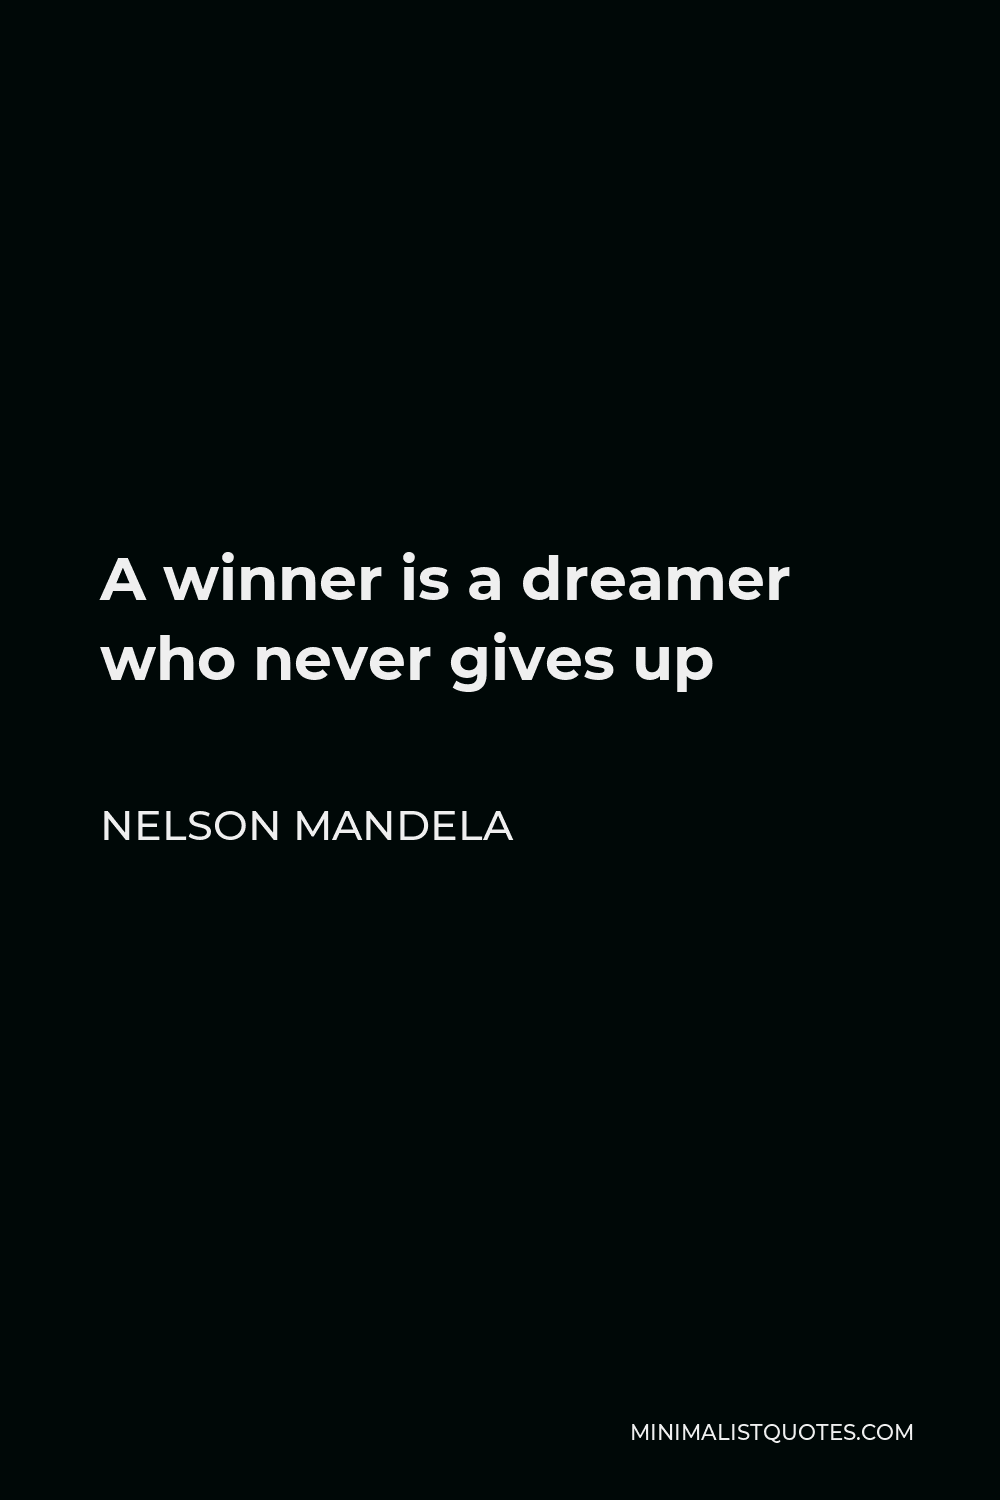 Nelson Mandela Quote: A winner is a dreamer who never gives up